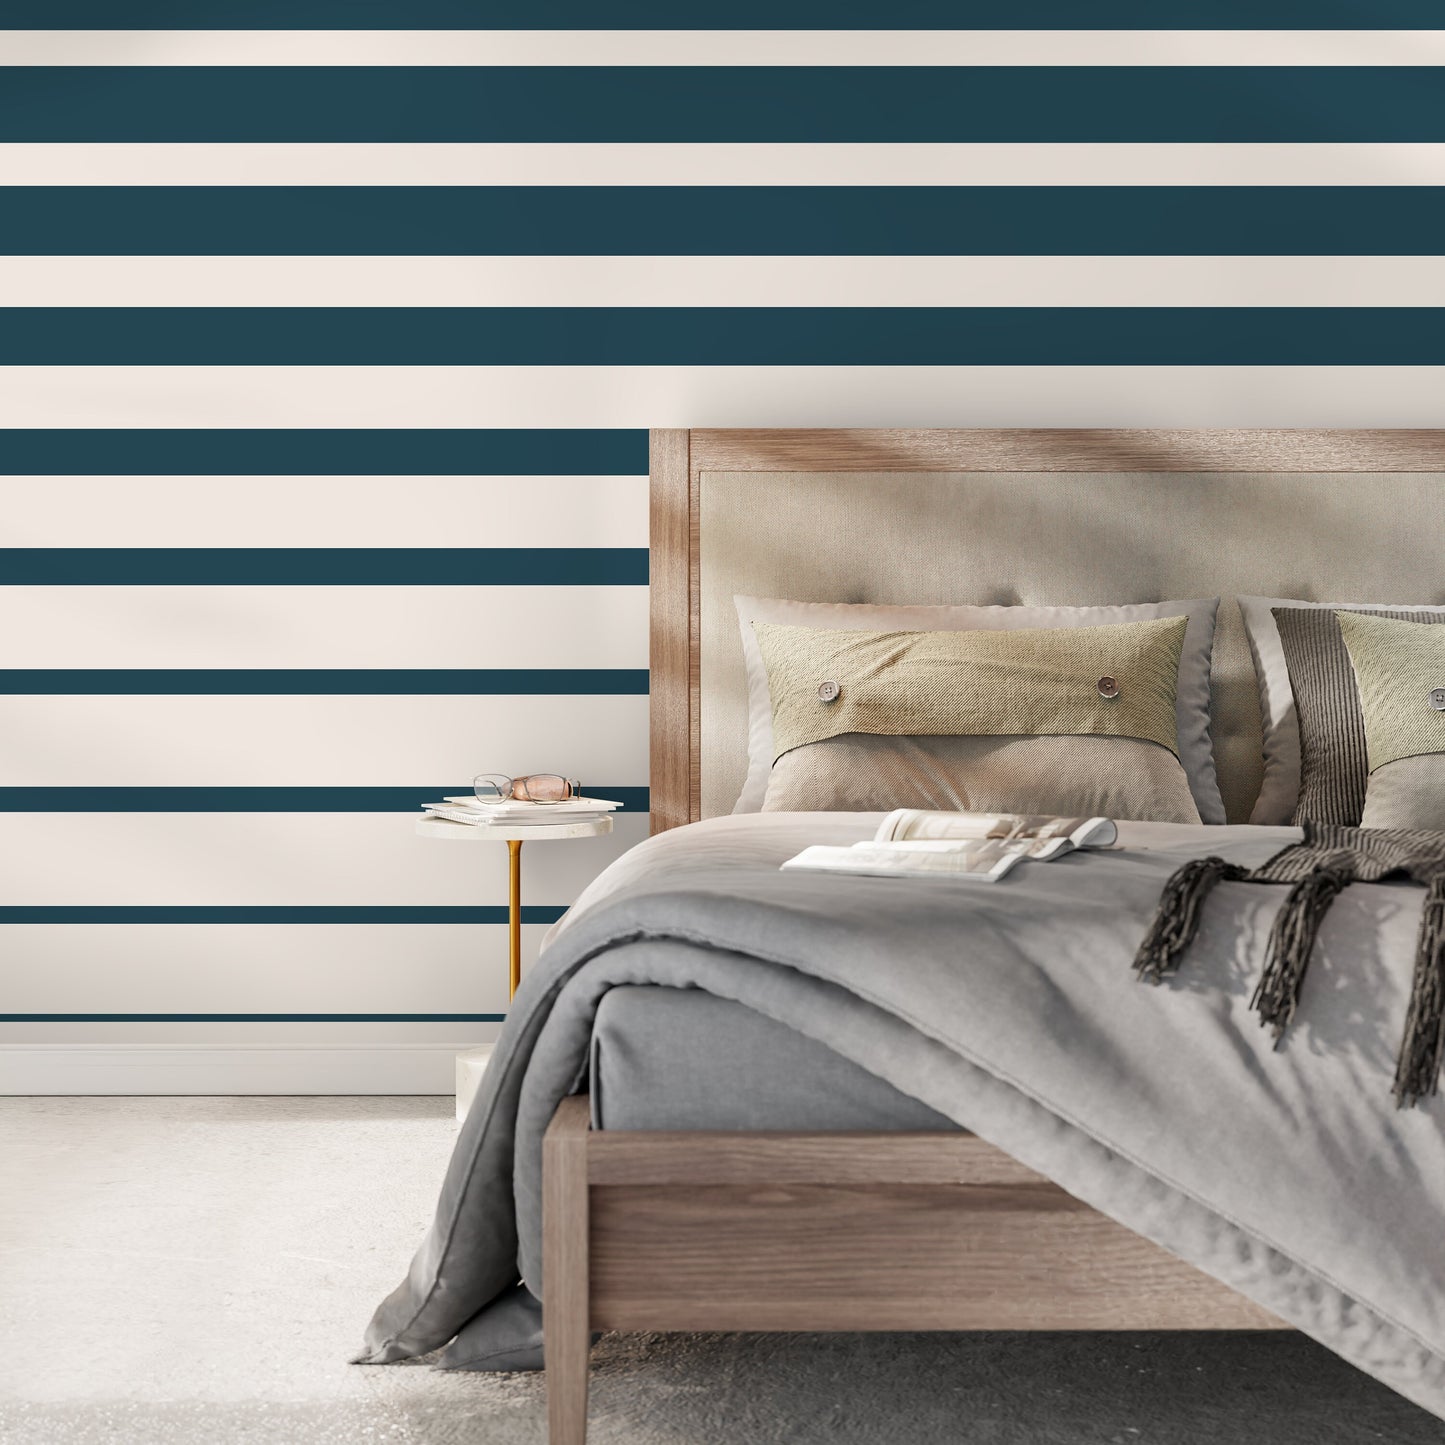 Dark Teal Blue Striped Wallpaper Modern Wallpaper Peel and Stick and Traditional Wallpaper - D729